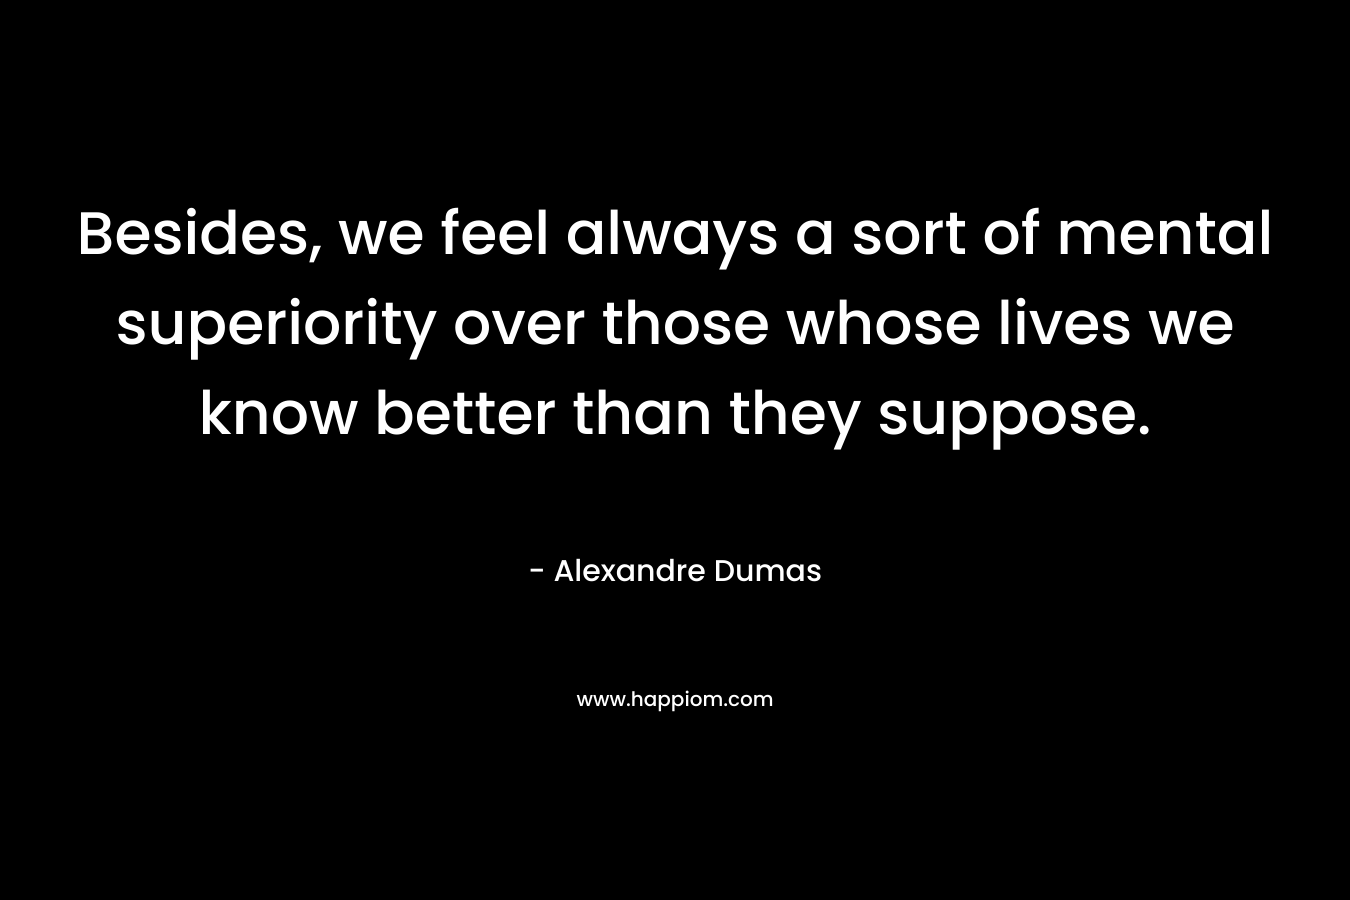 Besides, we feel always a sort of mental superiority over those whose lives we know better than they suppose. – Alexandre Dumas